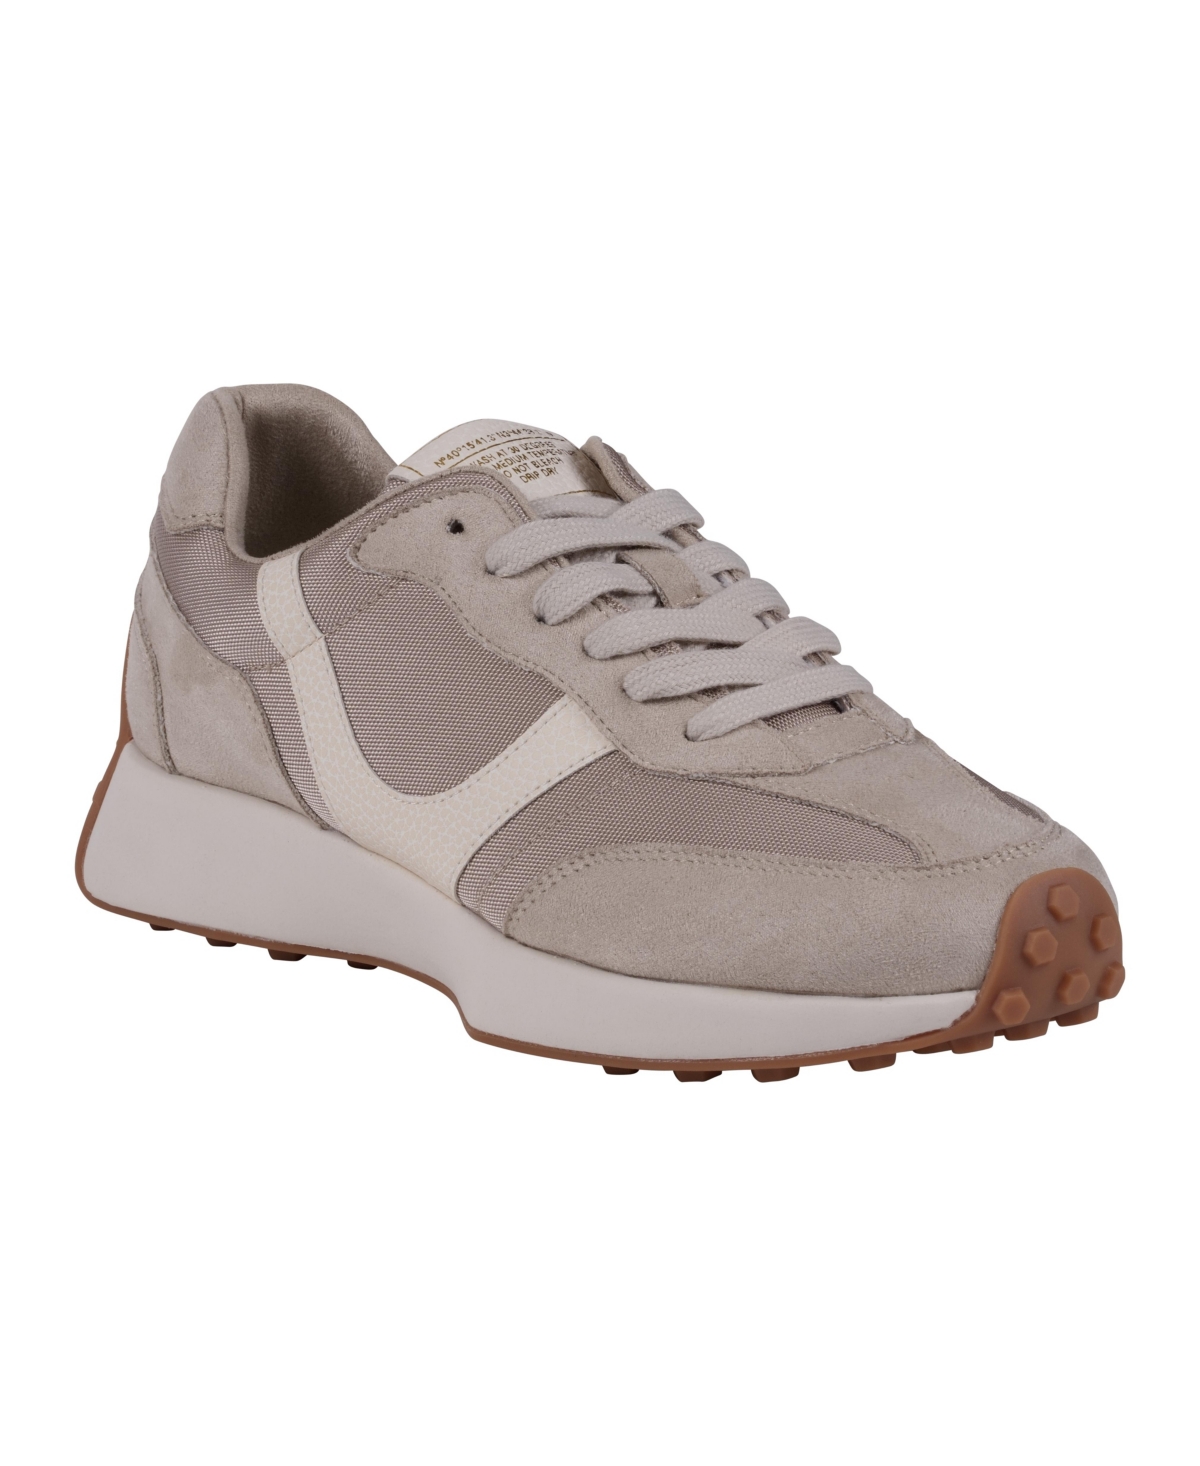 Women's Howell Lace Up Sneakers - Sand